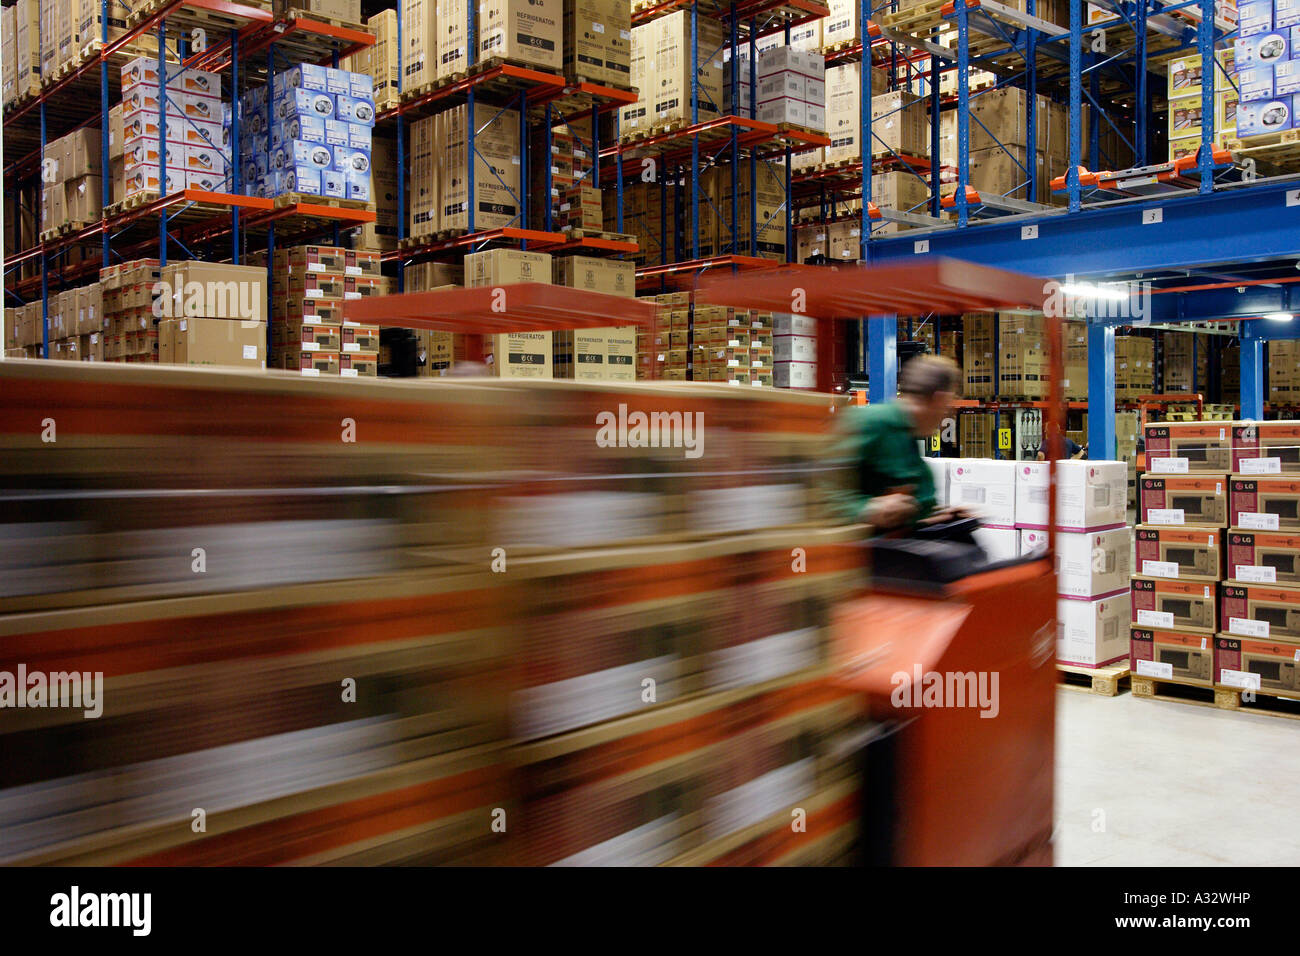 Warehouseman operating a forklift in a high rack warehouse, Willich, Germany Stock Photo